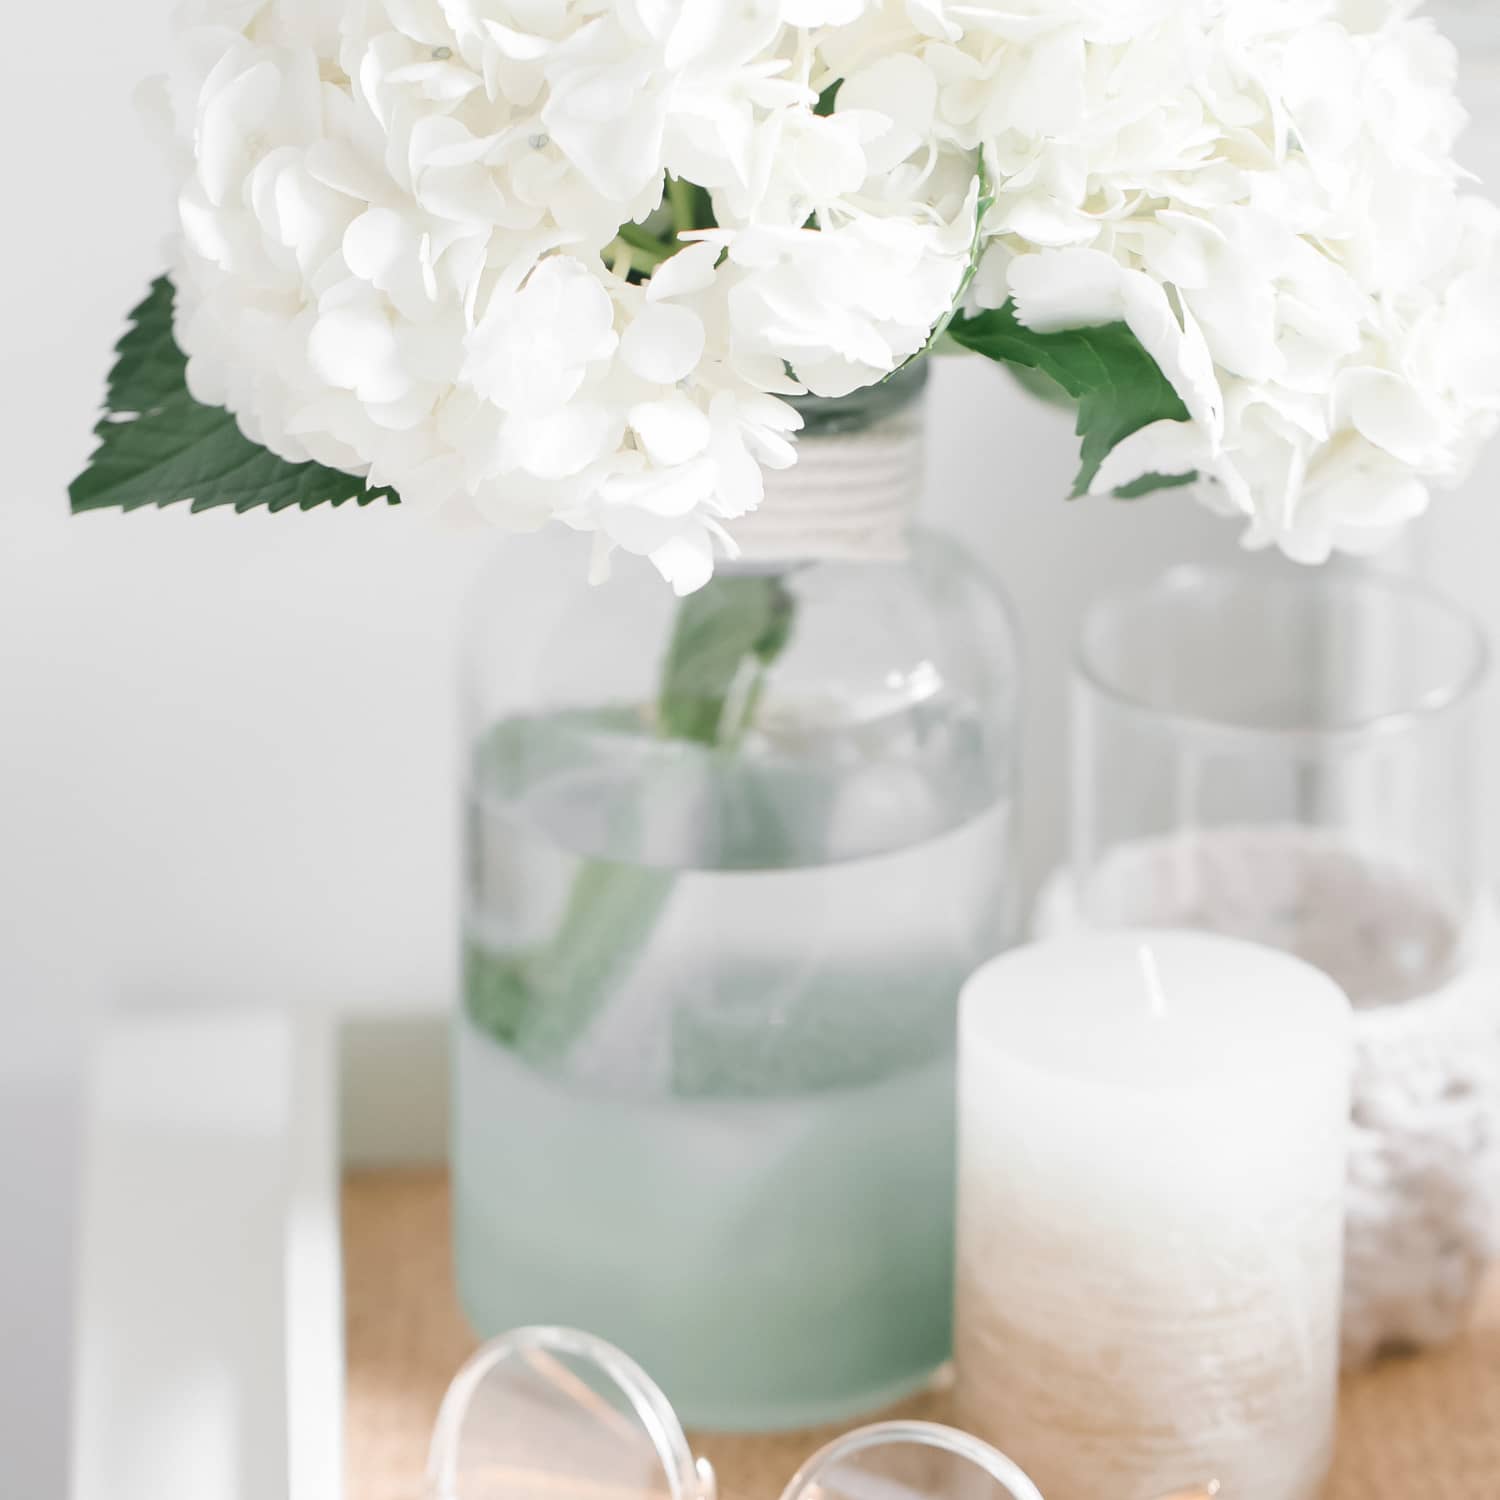 A tray holding a pair of glasses, a candle, and a vase holding white flowers.